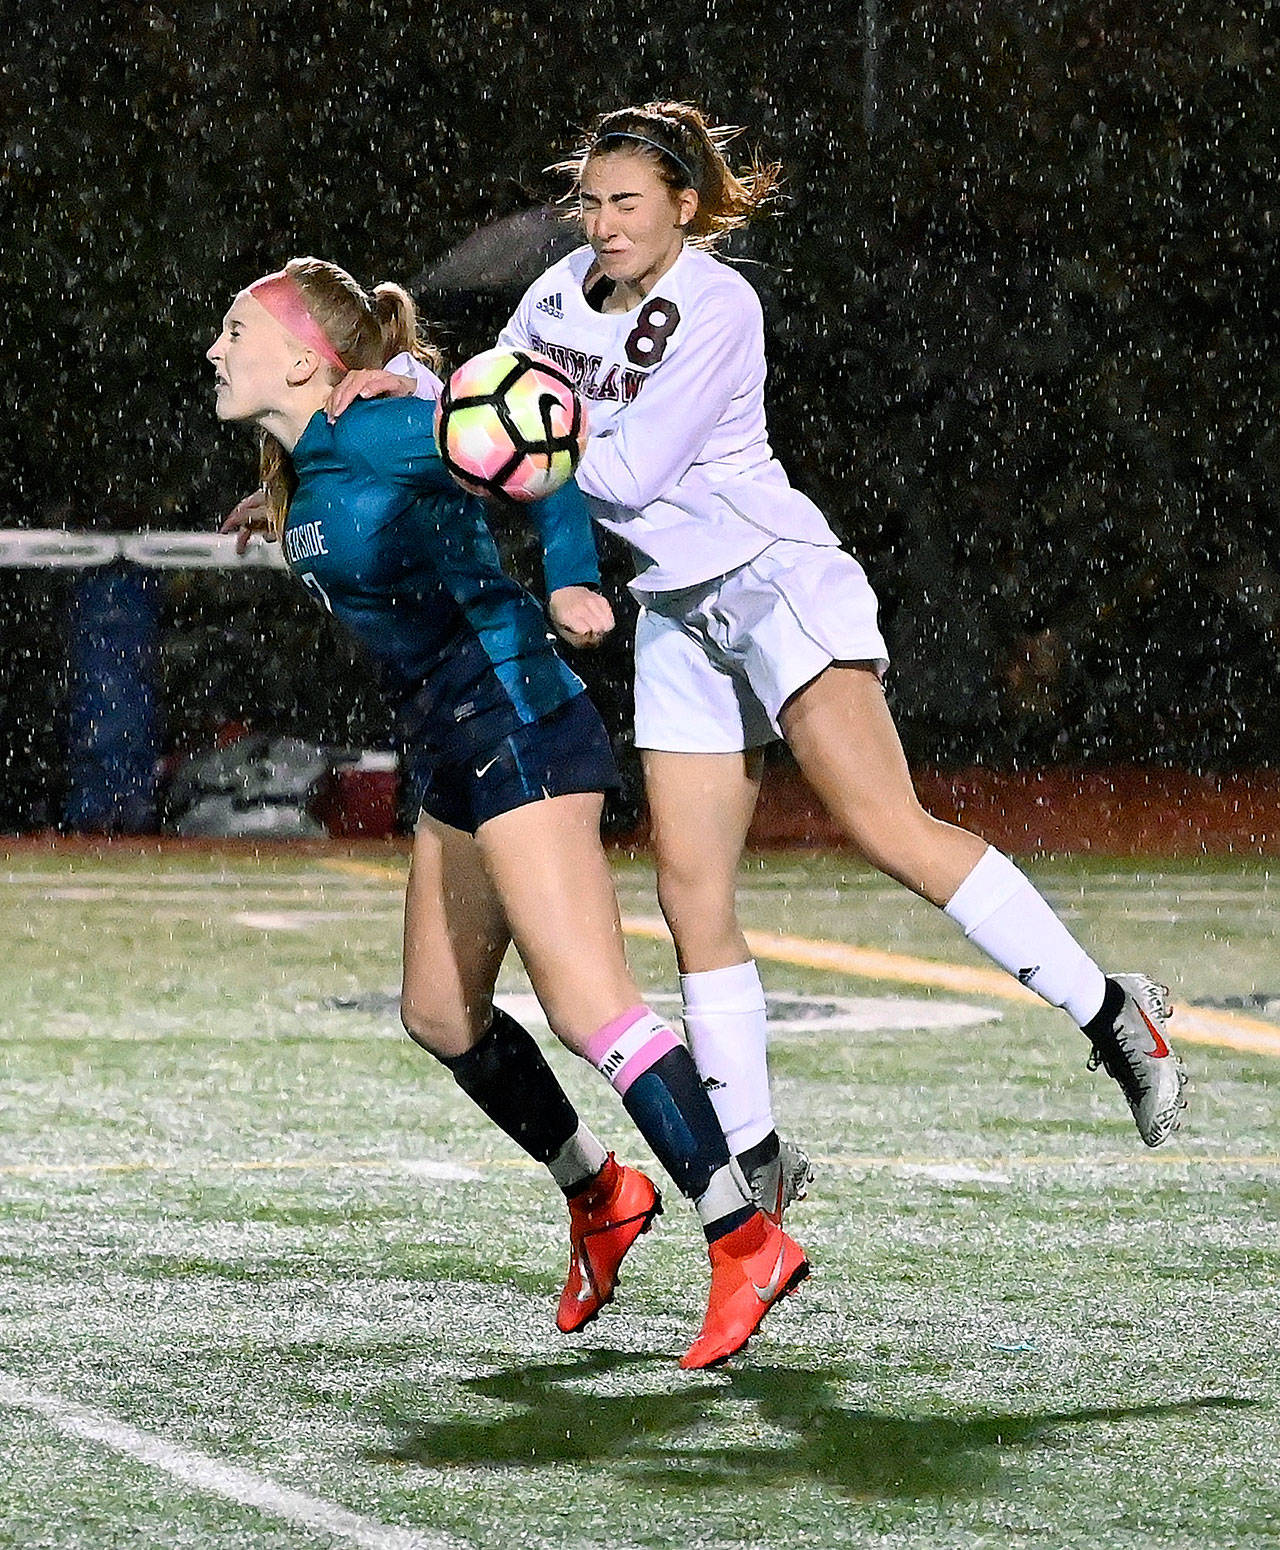 Auburn Riverside’s Kayla Rydberg, left, and Enumclaw’s Nicole Huff vie for the ball during a wet, gusty first half of their NPSL Olympic Division soccer match Thursday night at Auburn Riverside High School. RACHEL CIAMPI, Auburn Reporter